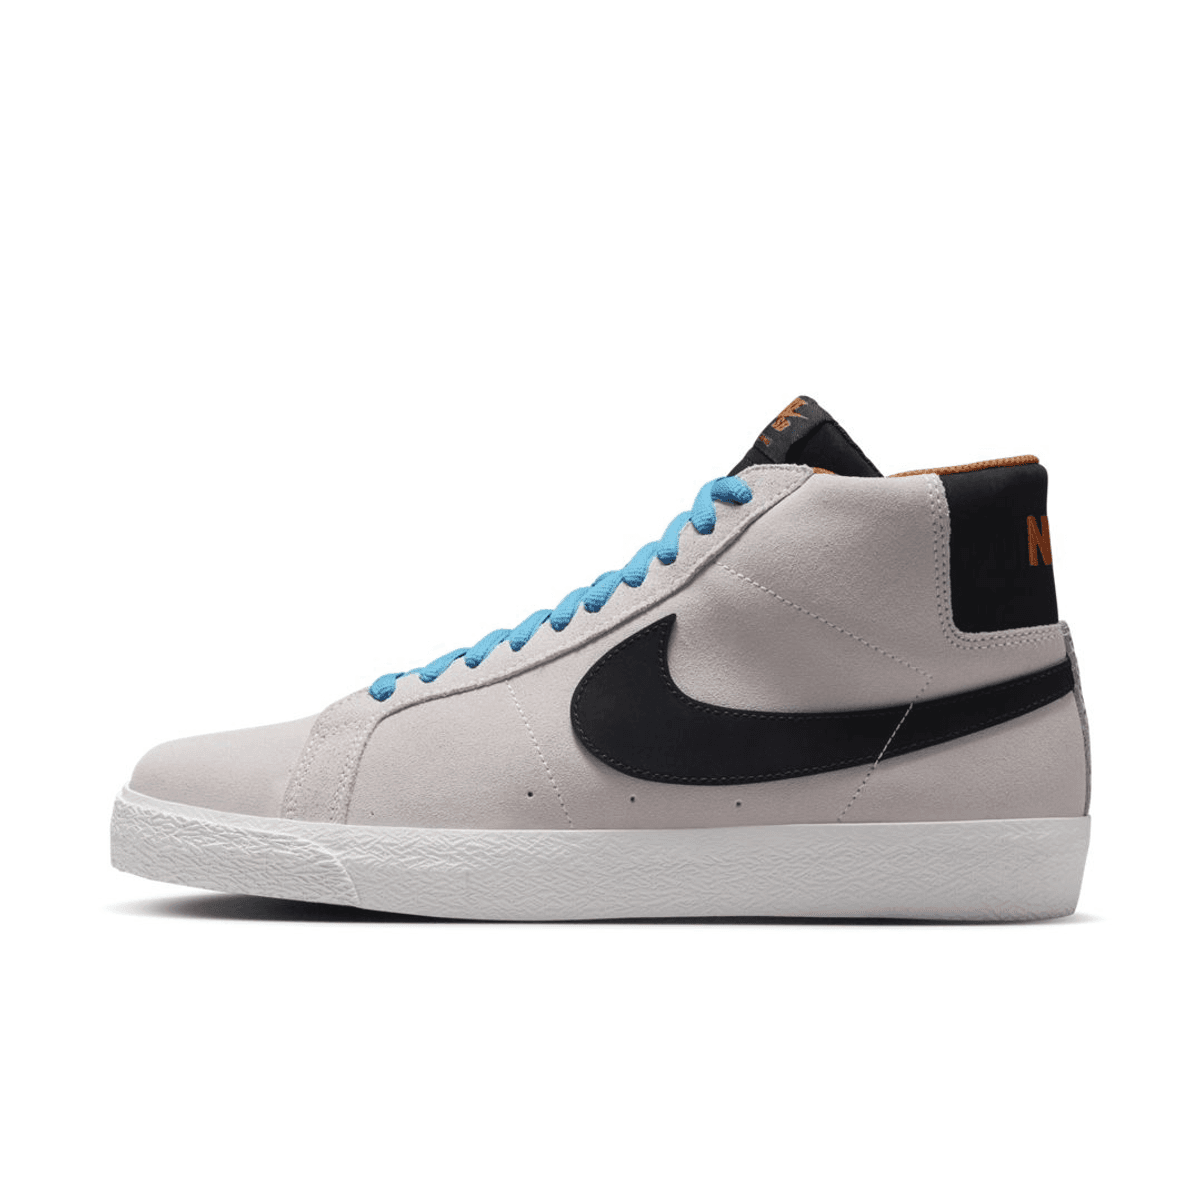 Official Look At The Nike SB Blazer Mid “Olympics”